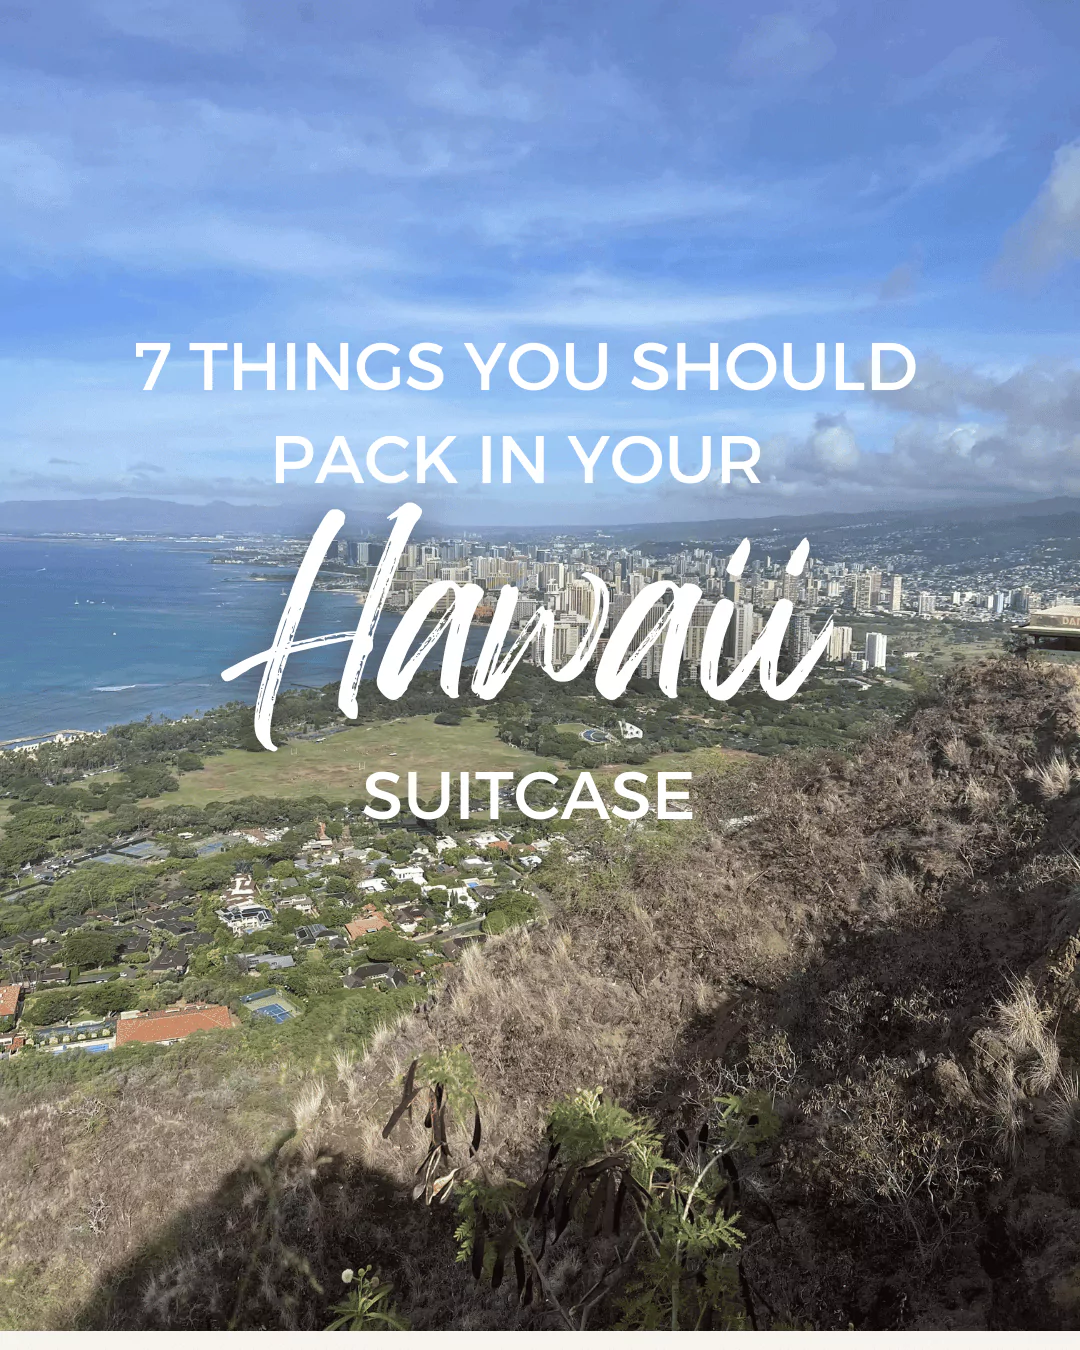 7 Things You Should Pack in Your Hawaii Suitcase